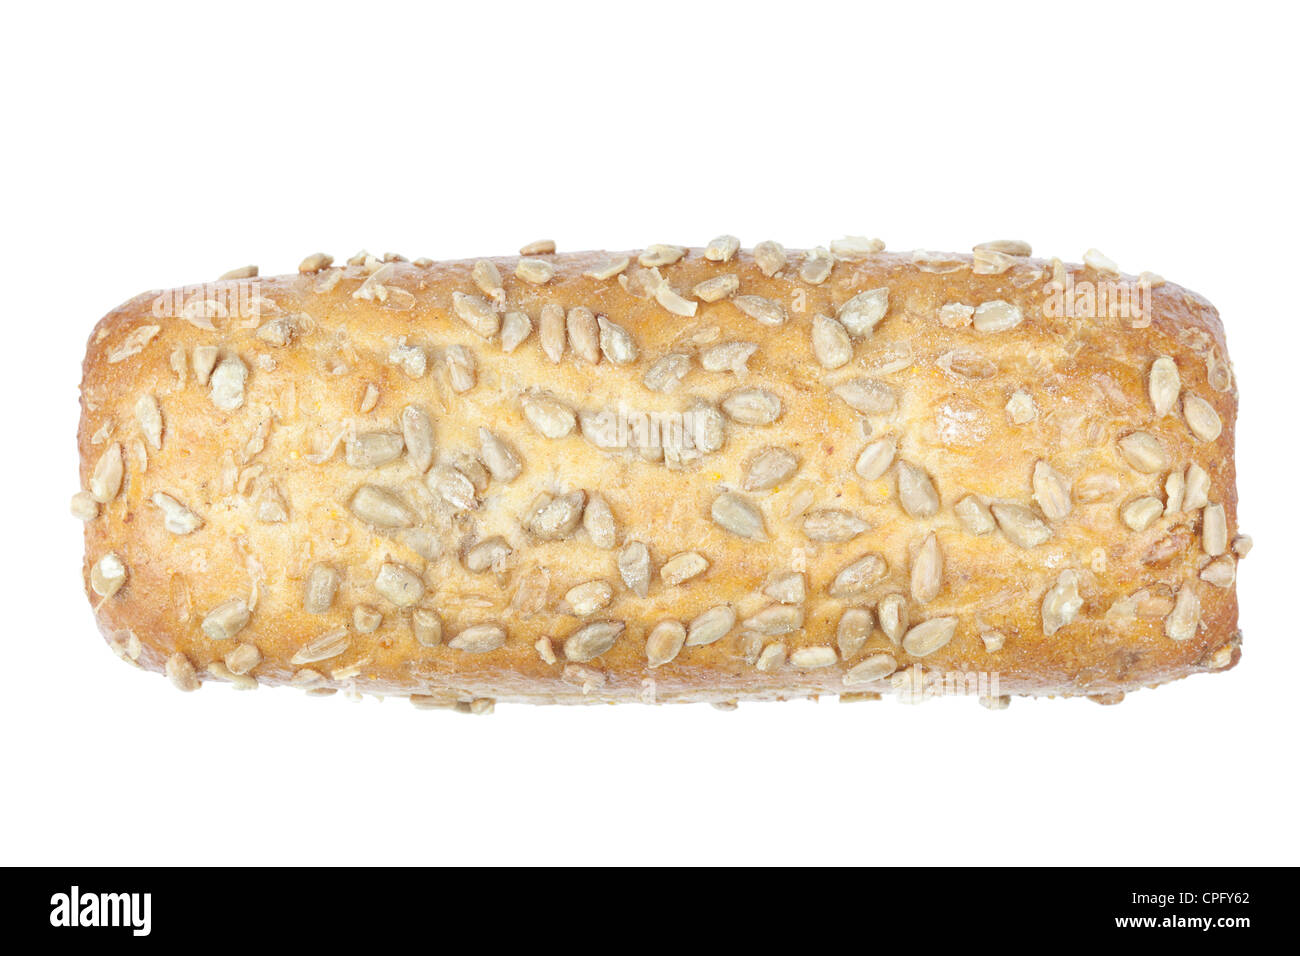 Wholemeal bread roll topped with sunflower seeds Stock Photo